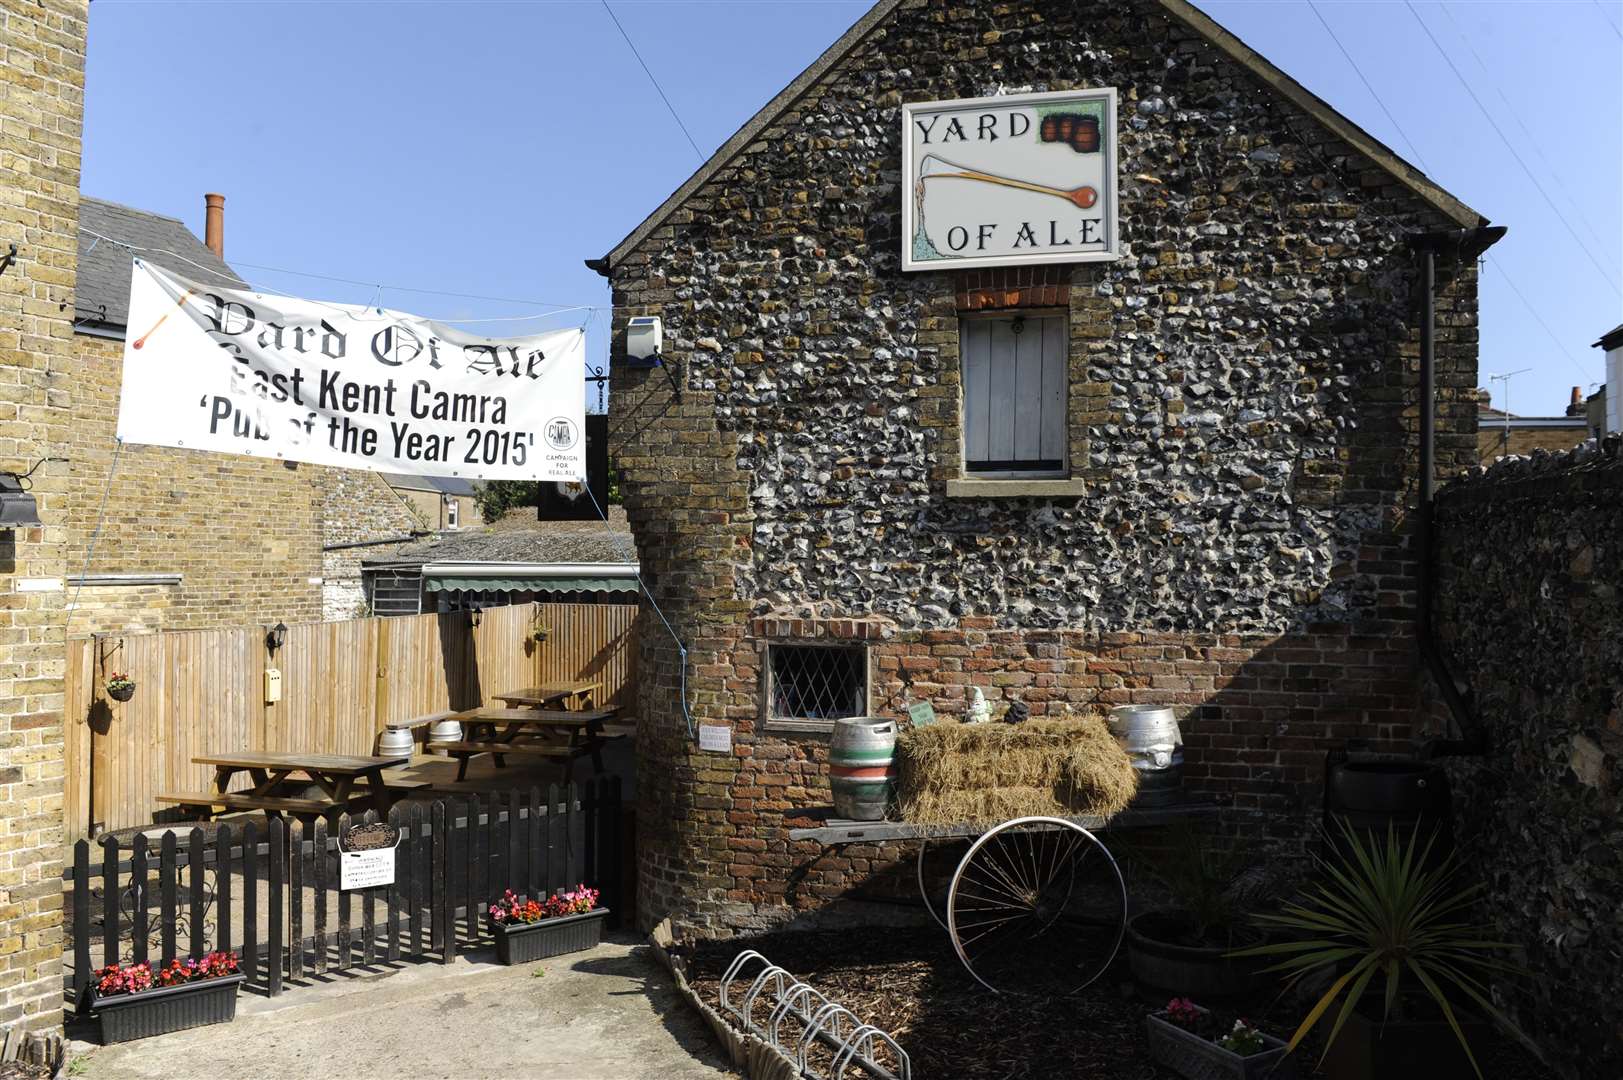 Yard of Ale, Church Street, St Peter's, Broadstairs Picture: Tony Flashman